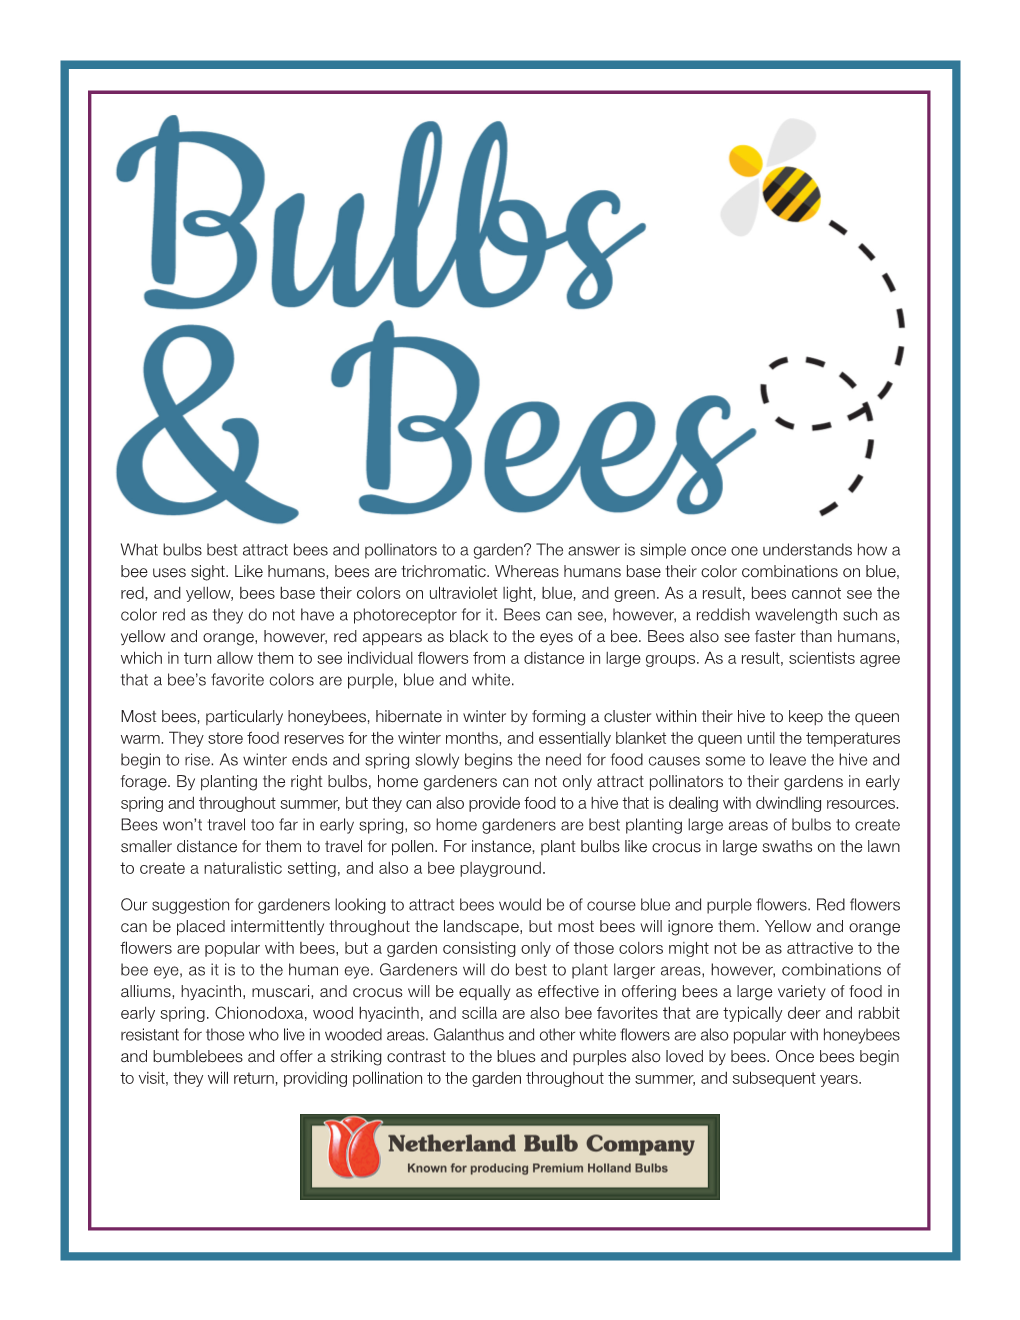 What Bulbs Best Attract Bees and Pollinators to a Garden? the Answer Is Simple Once One Understands How a Bee Uses Sight